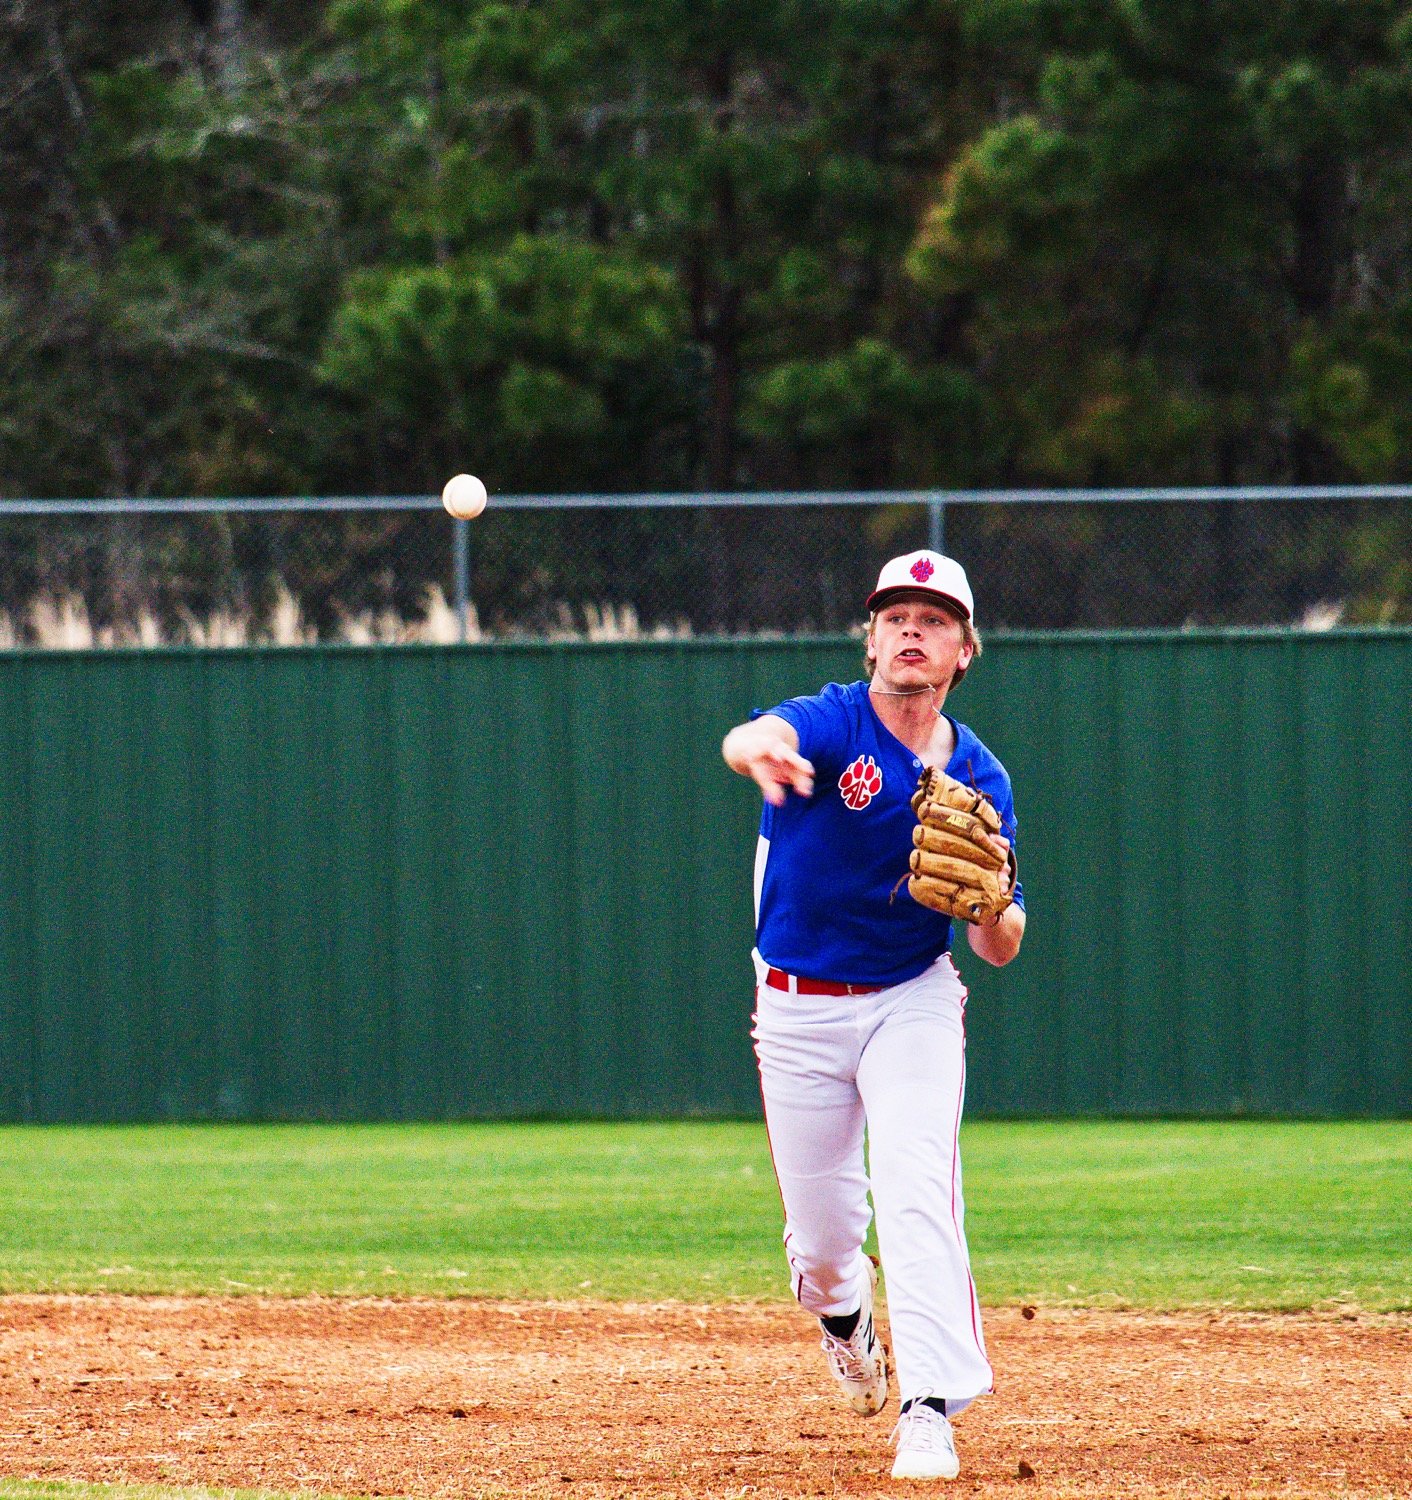 Blake Weissert makes a throw to first from shortstop.